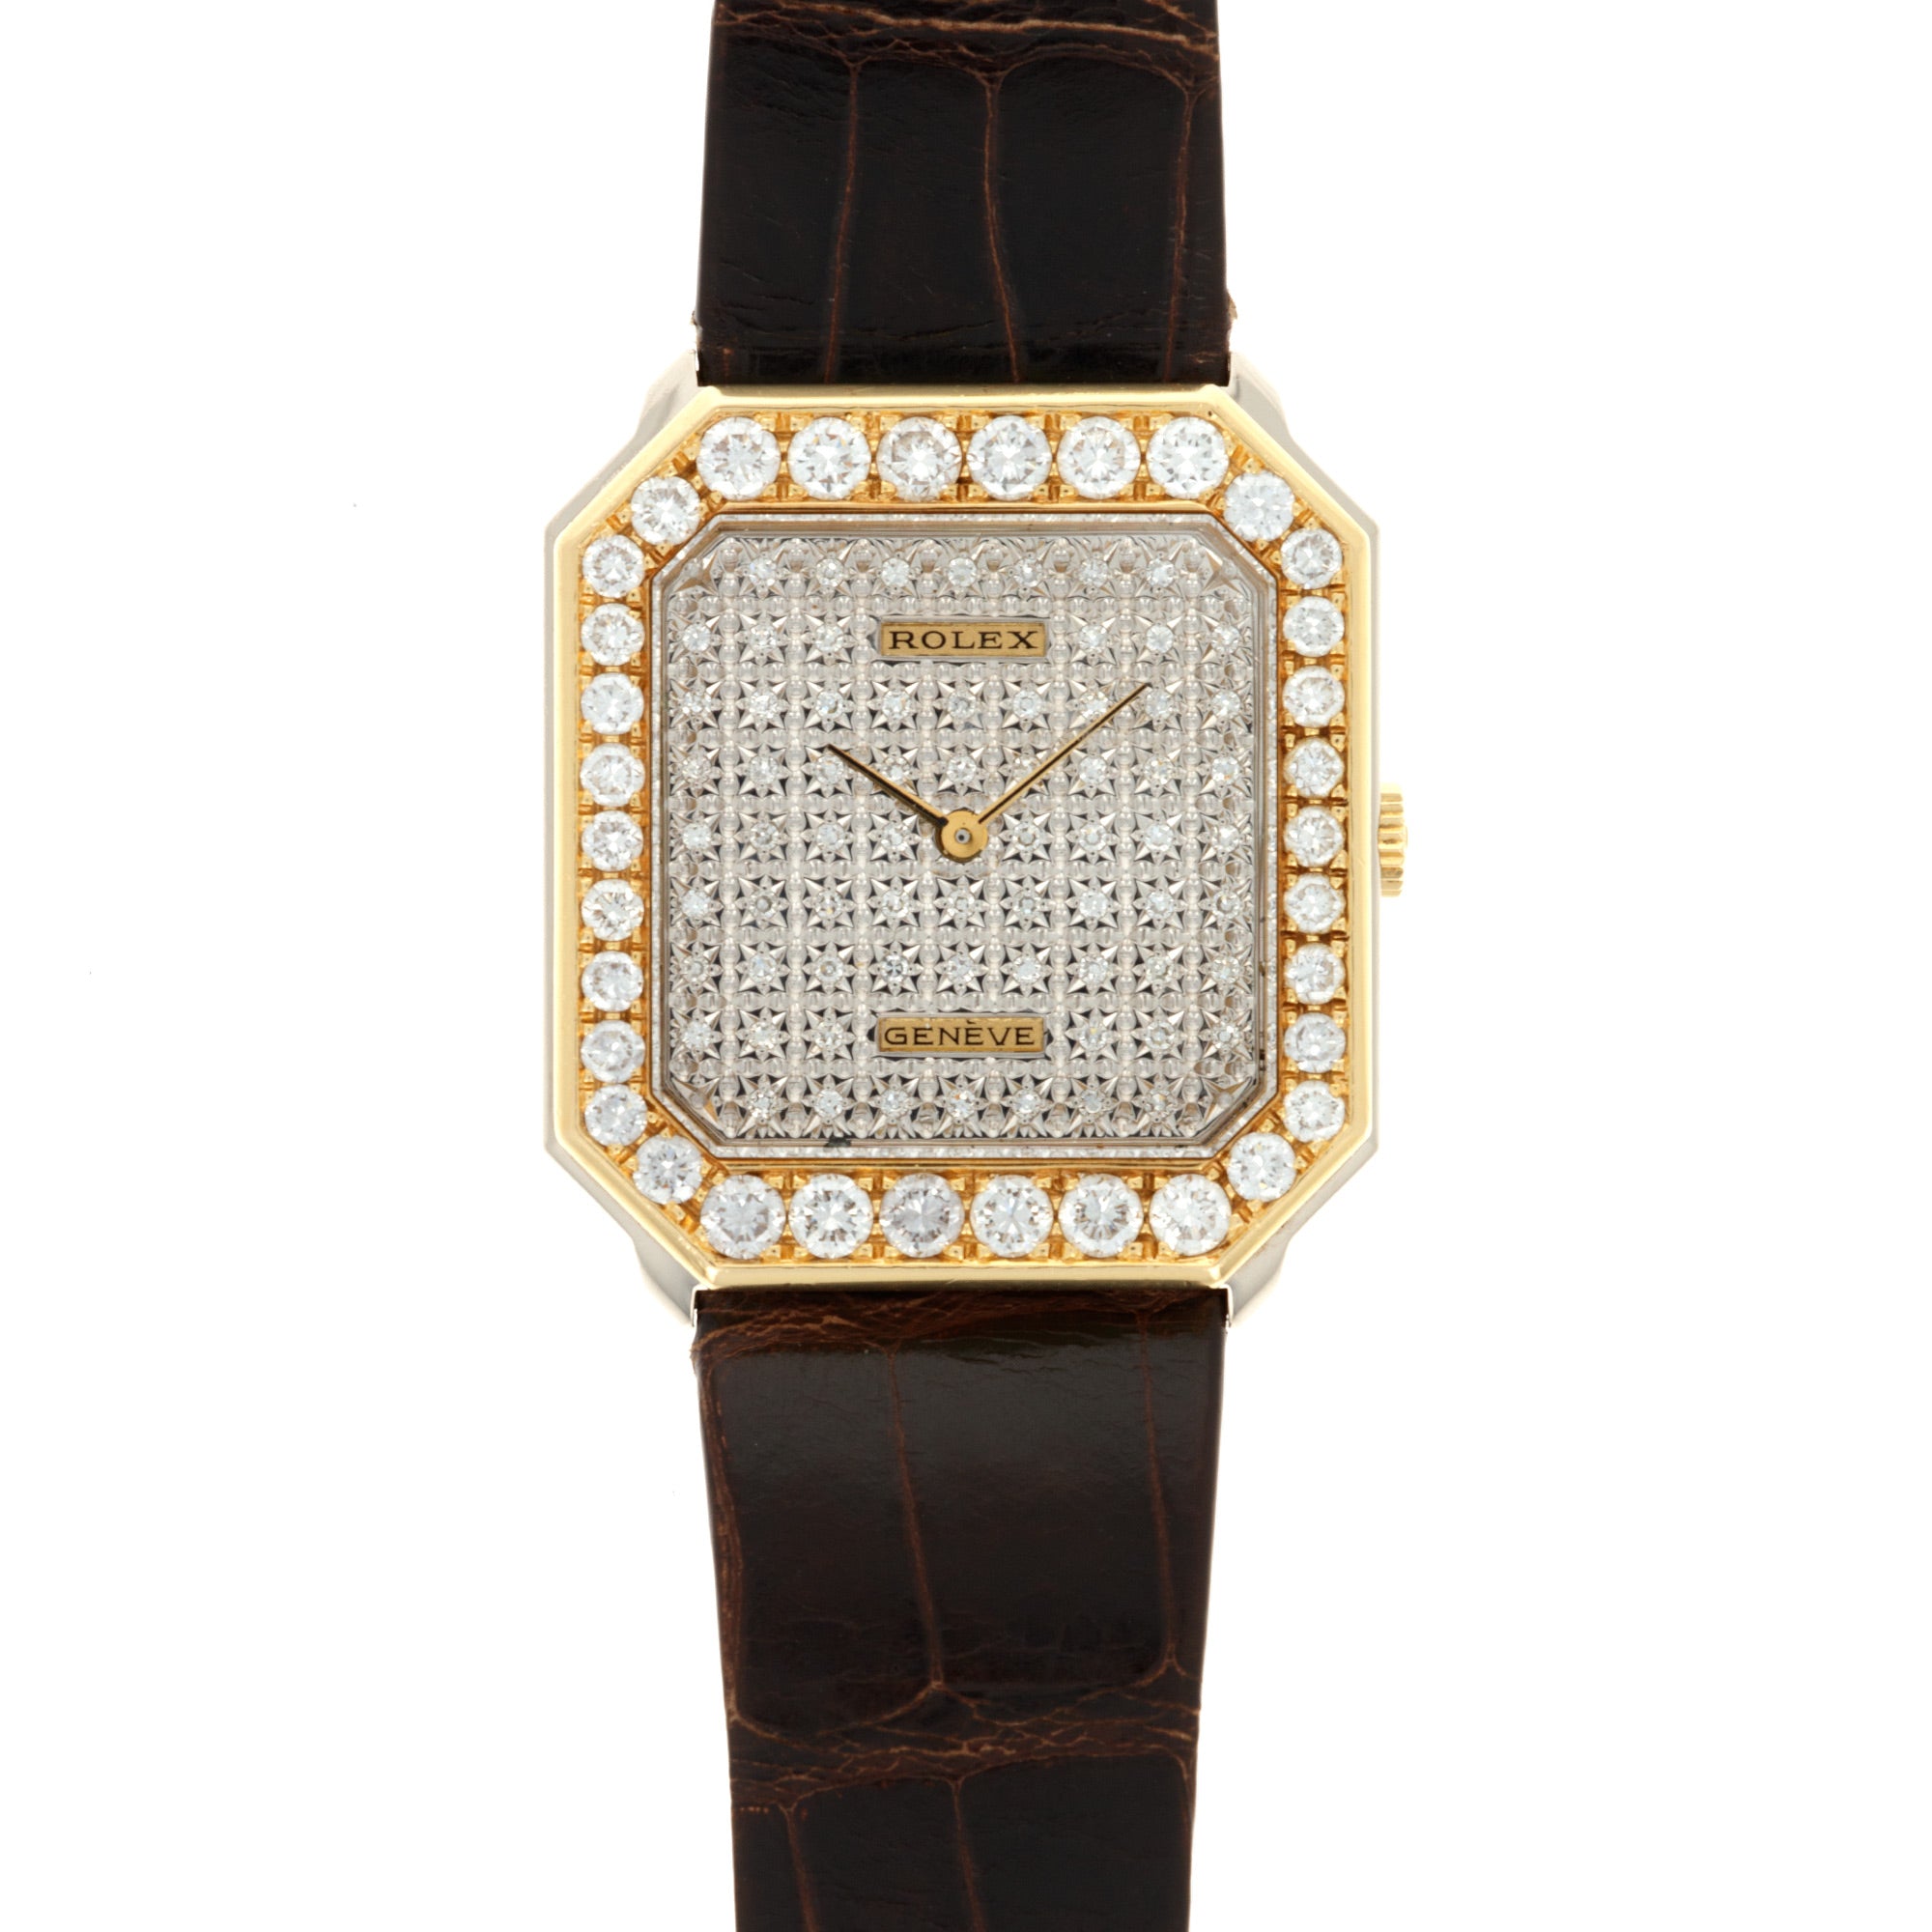 Rolex - Rolex Yellow Gold Diamond Watch Ref. 5032, Made for the Sultan of Oman - The Keystone Watches